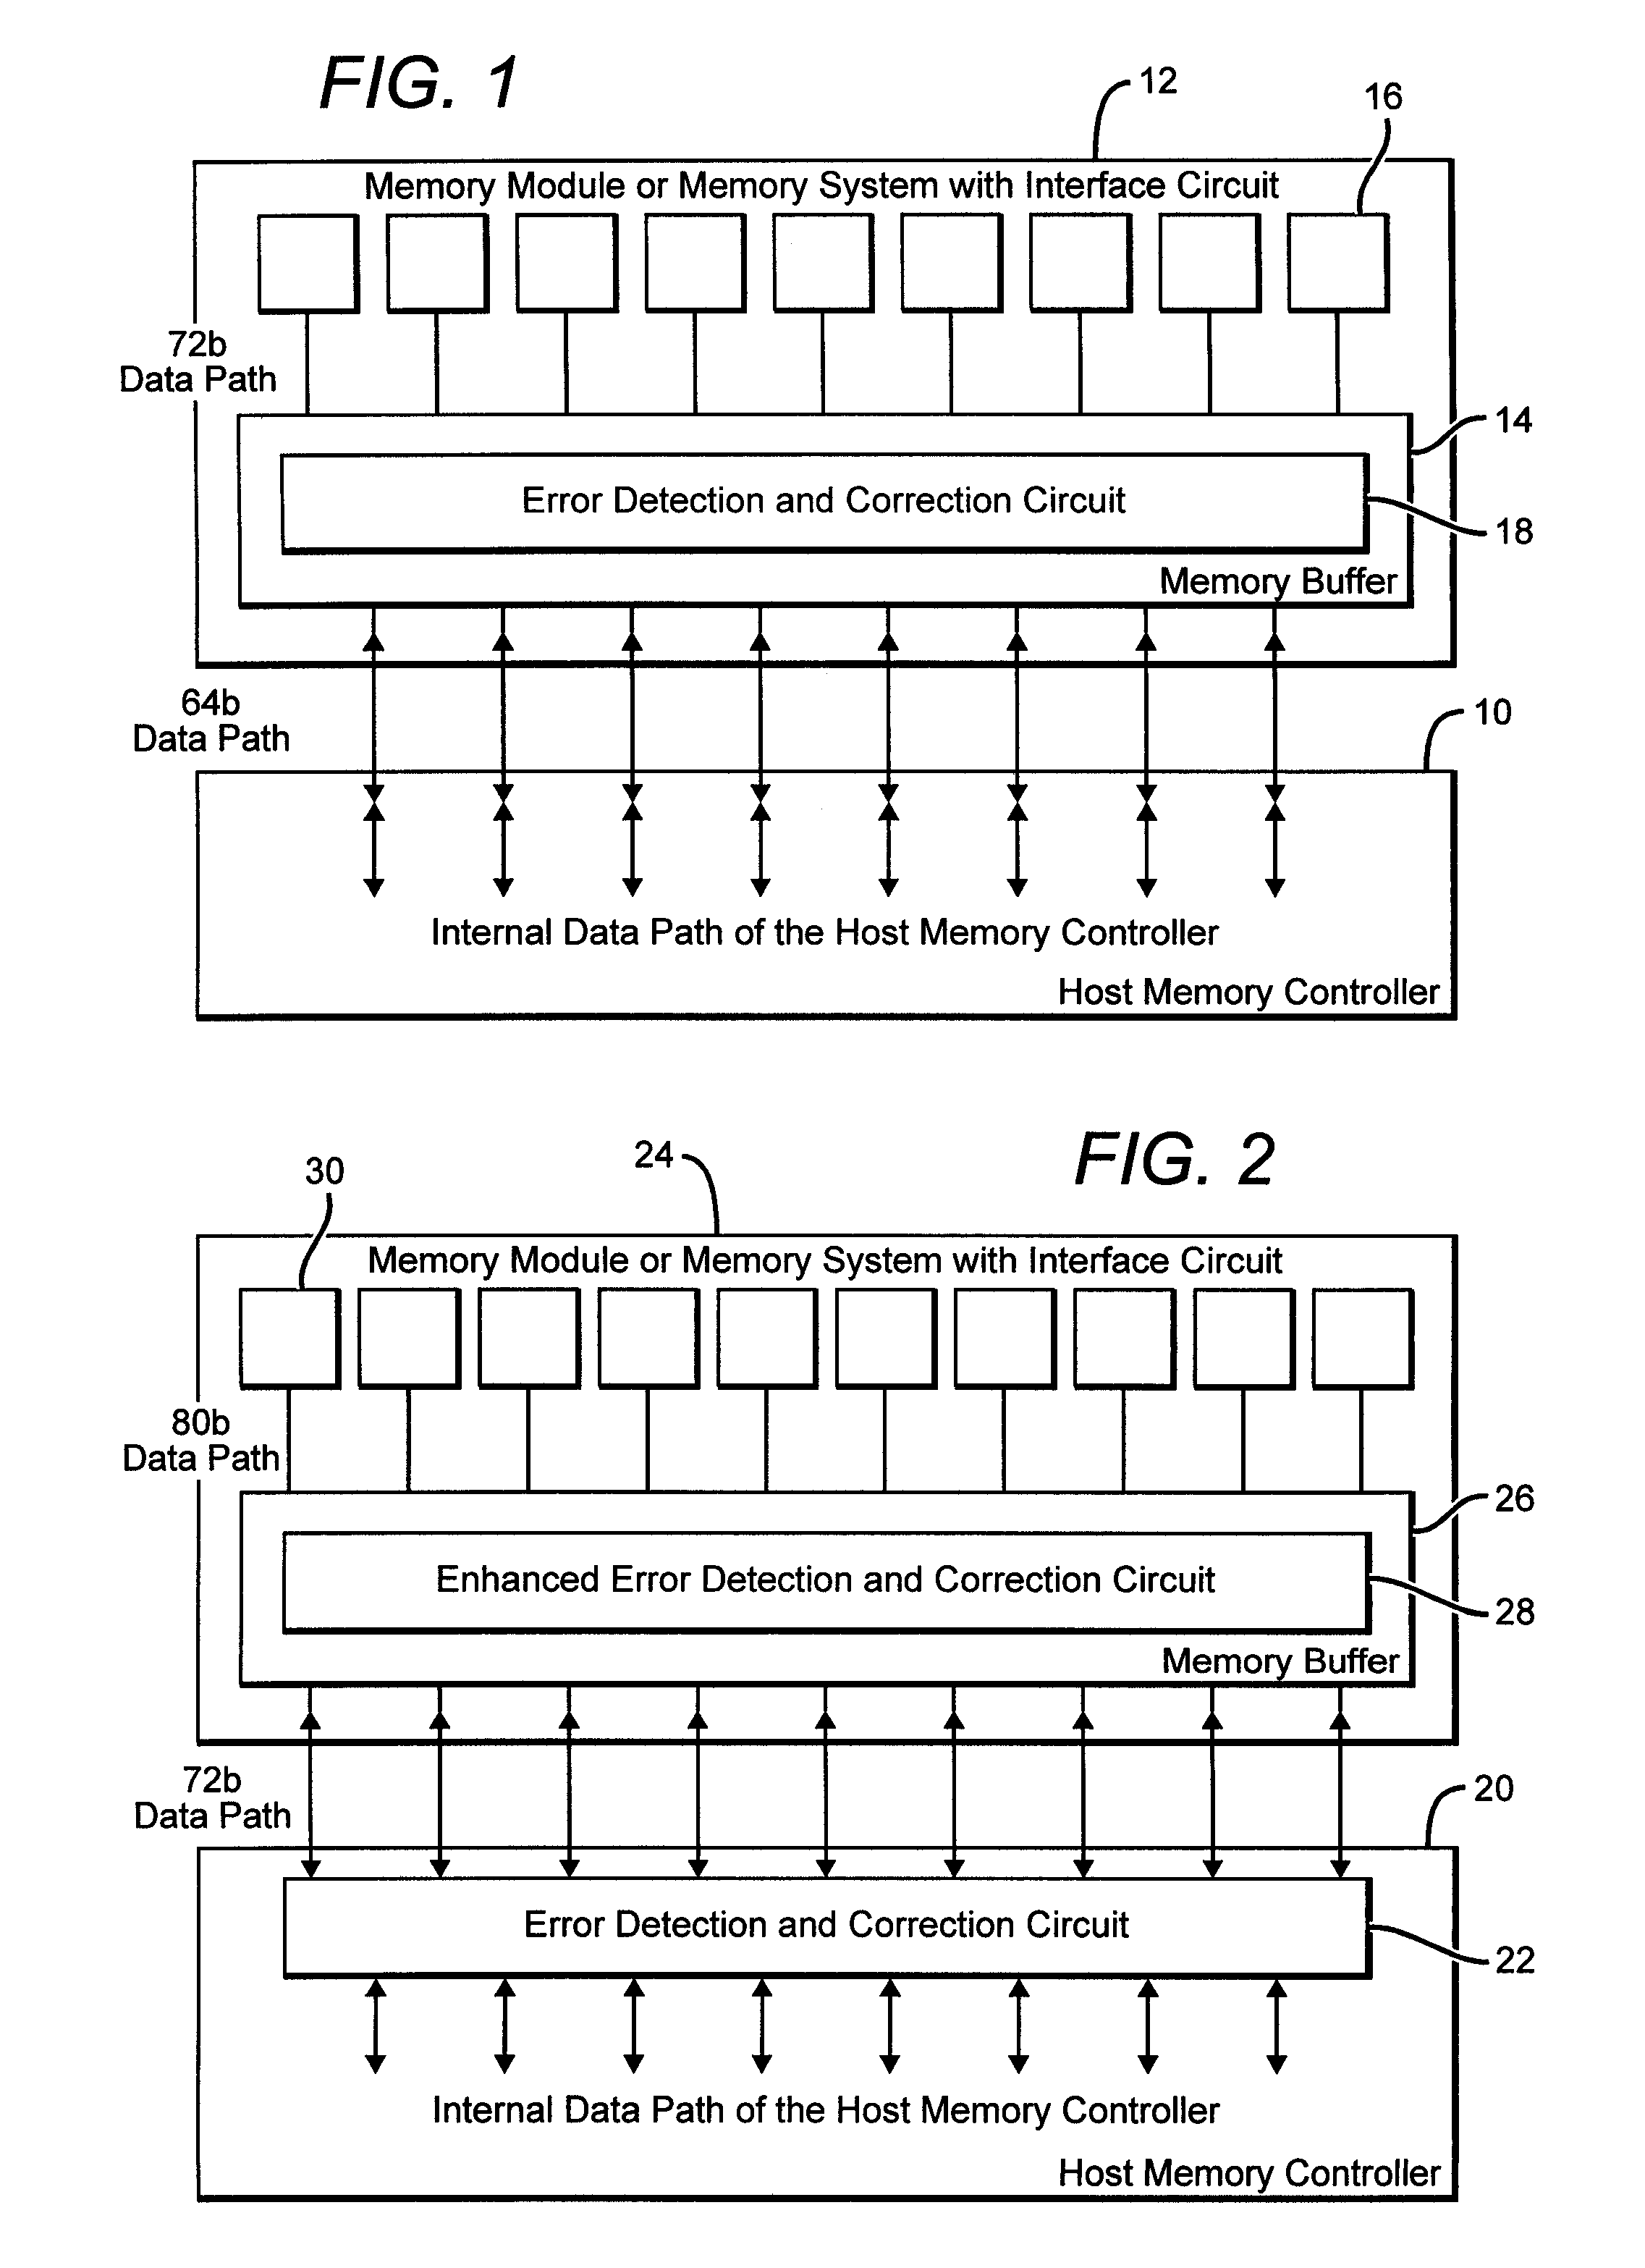 Systems and methods for error detection and correction in a memory module which includes a memory buffer